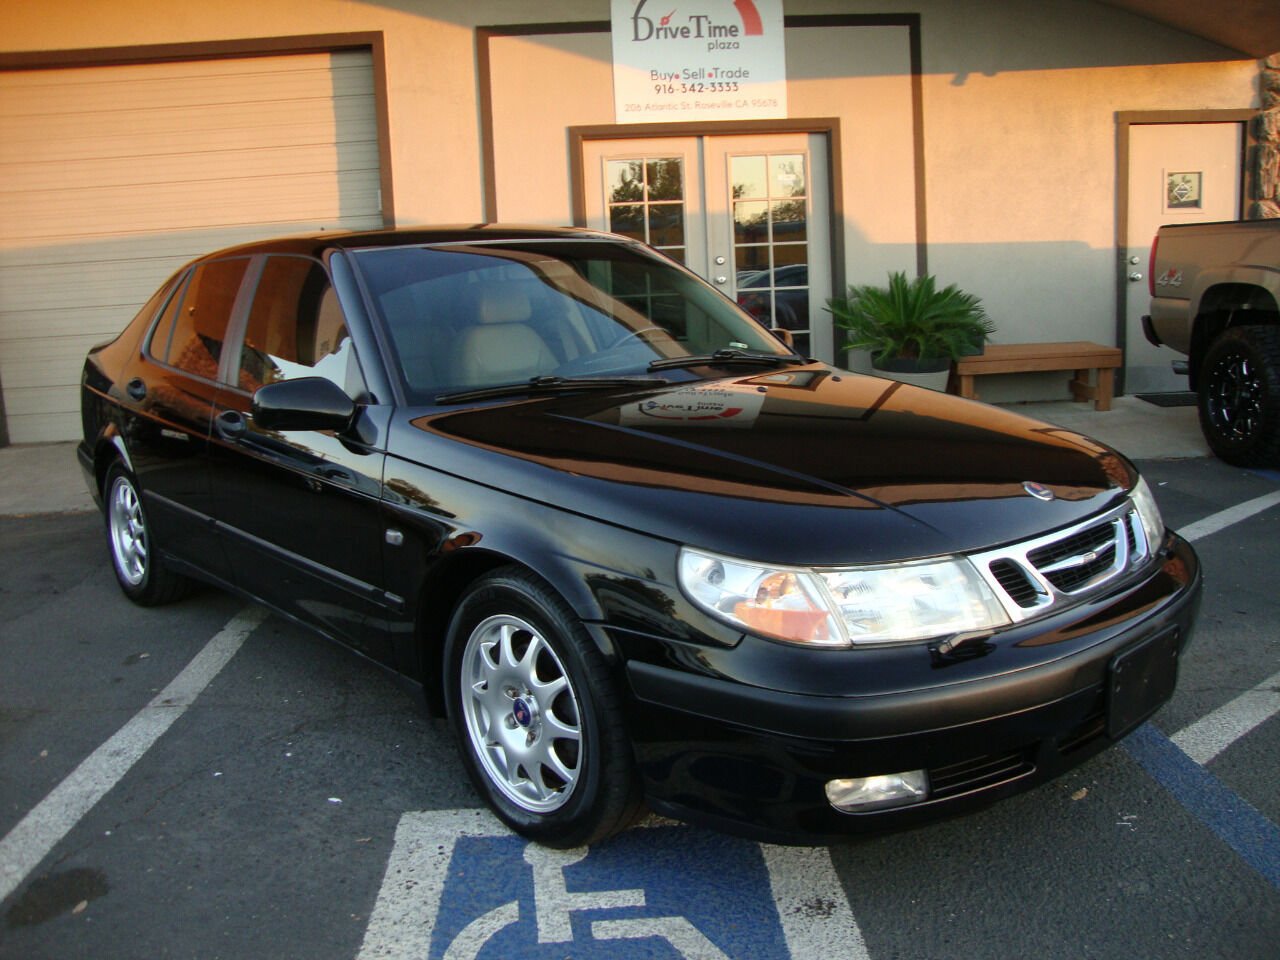 Used 2001 Saab 9-5 for Sale Right Now - Autotrader